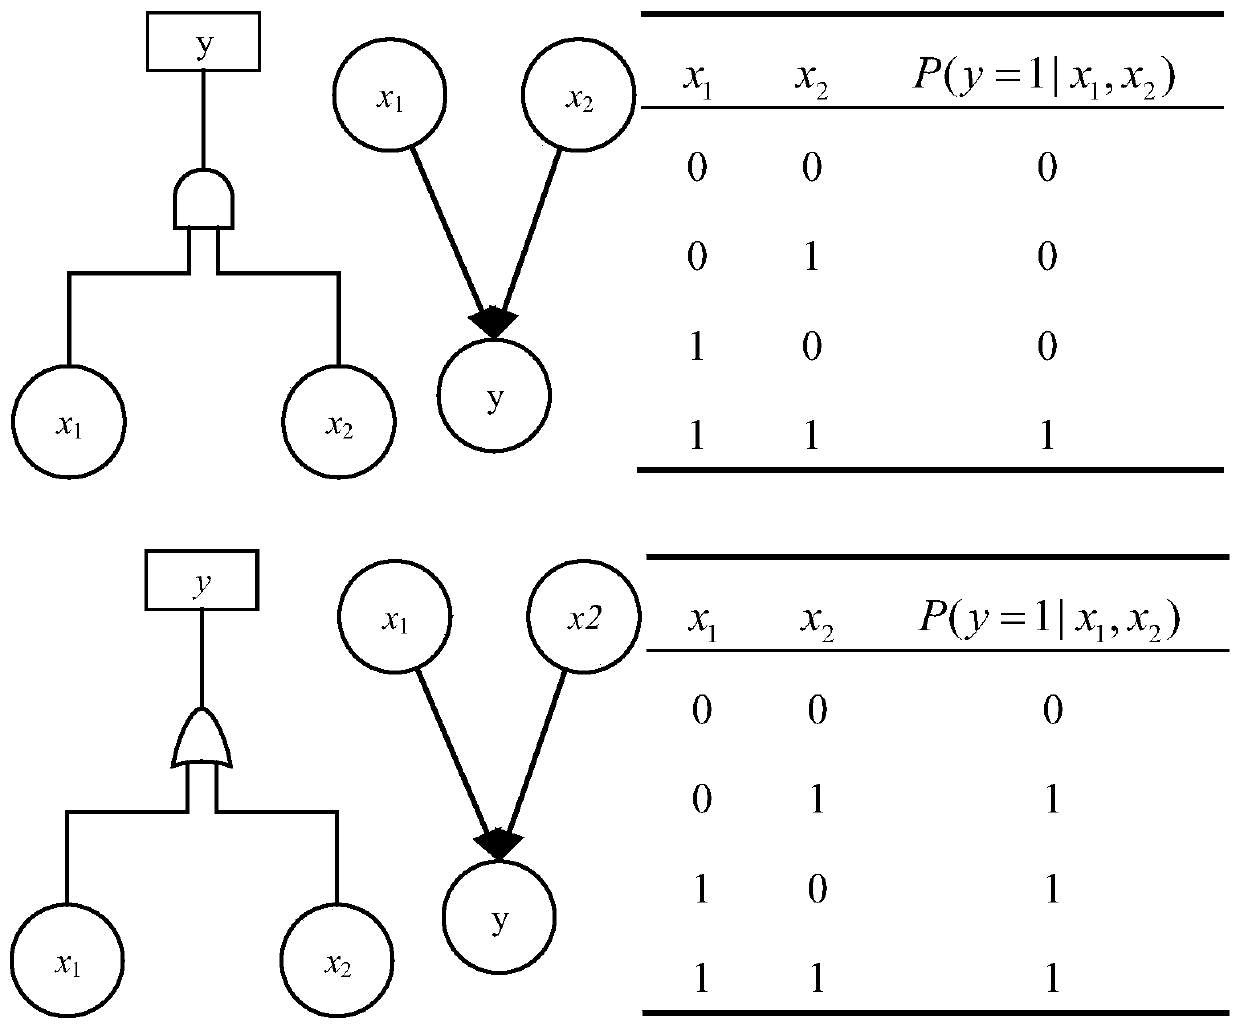 Tunnel risk evaluation method based on fuzzy polymorphic Bayesian network